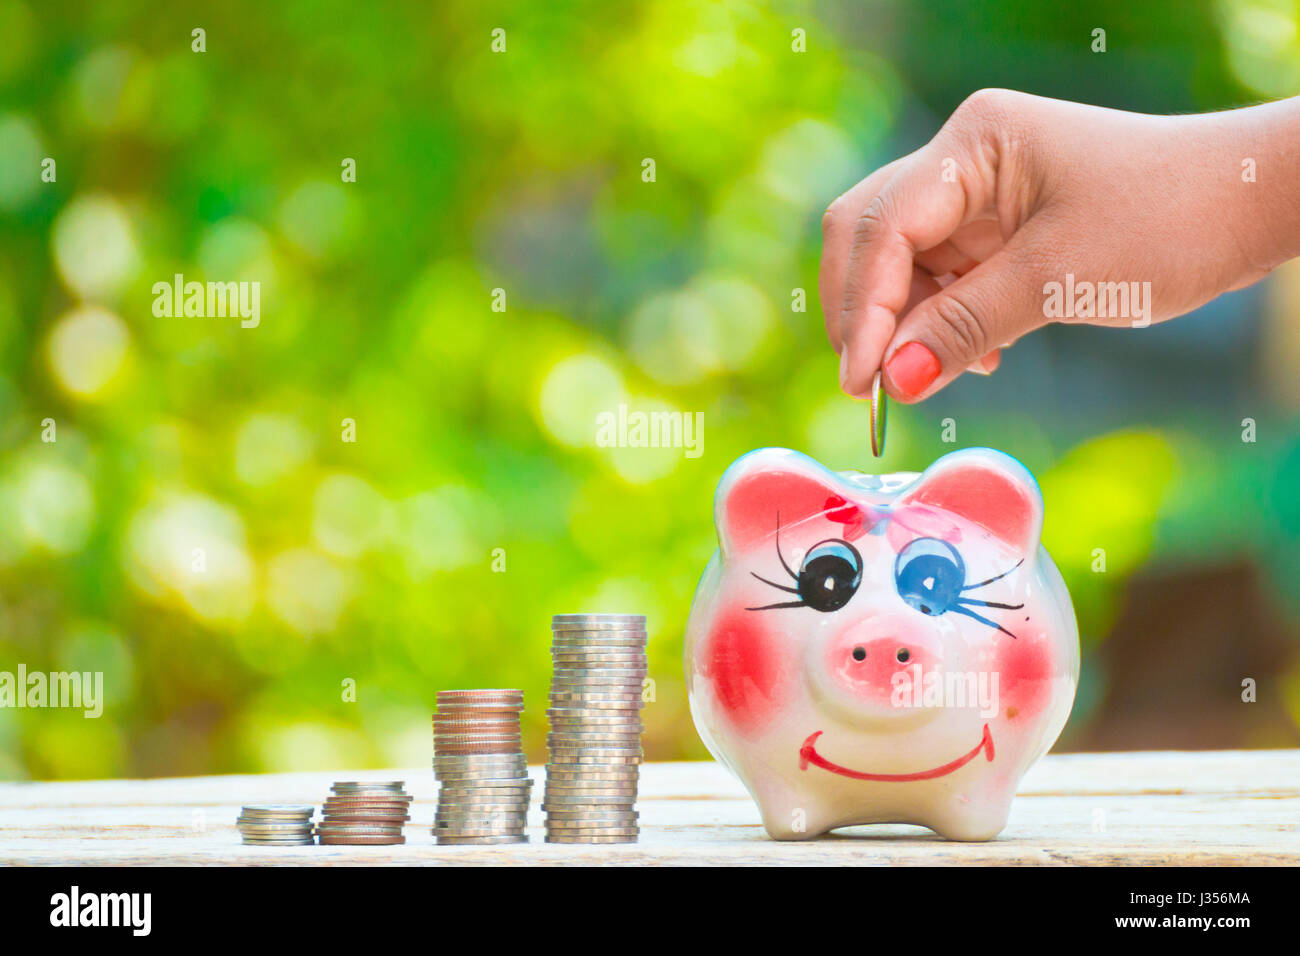 Start saving money. For the future savings concept Using the left